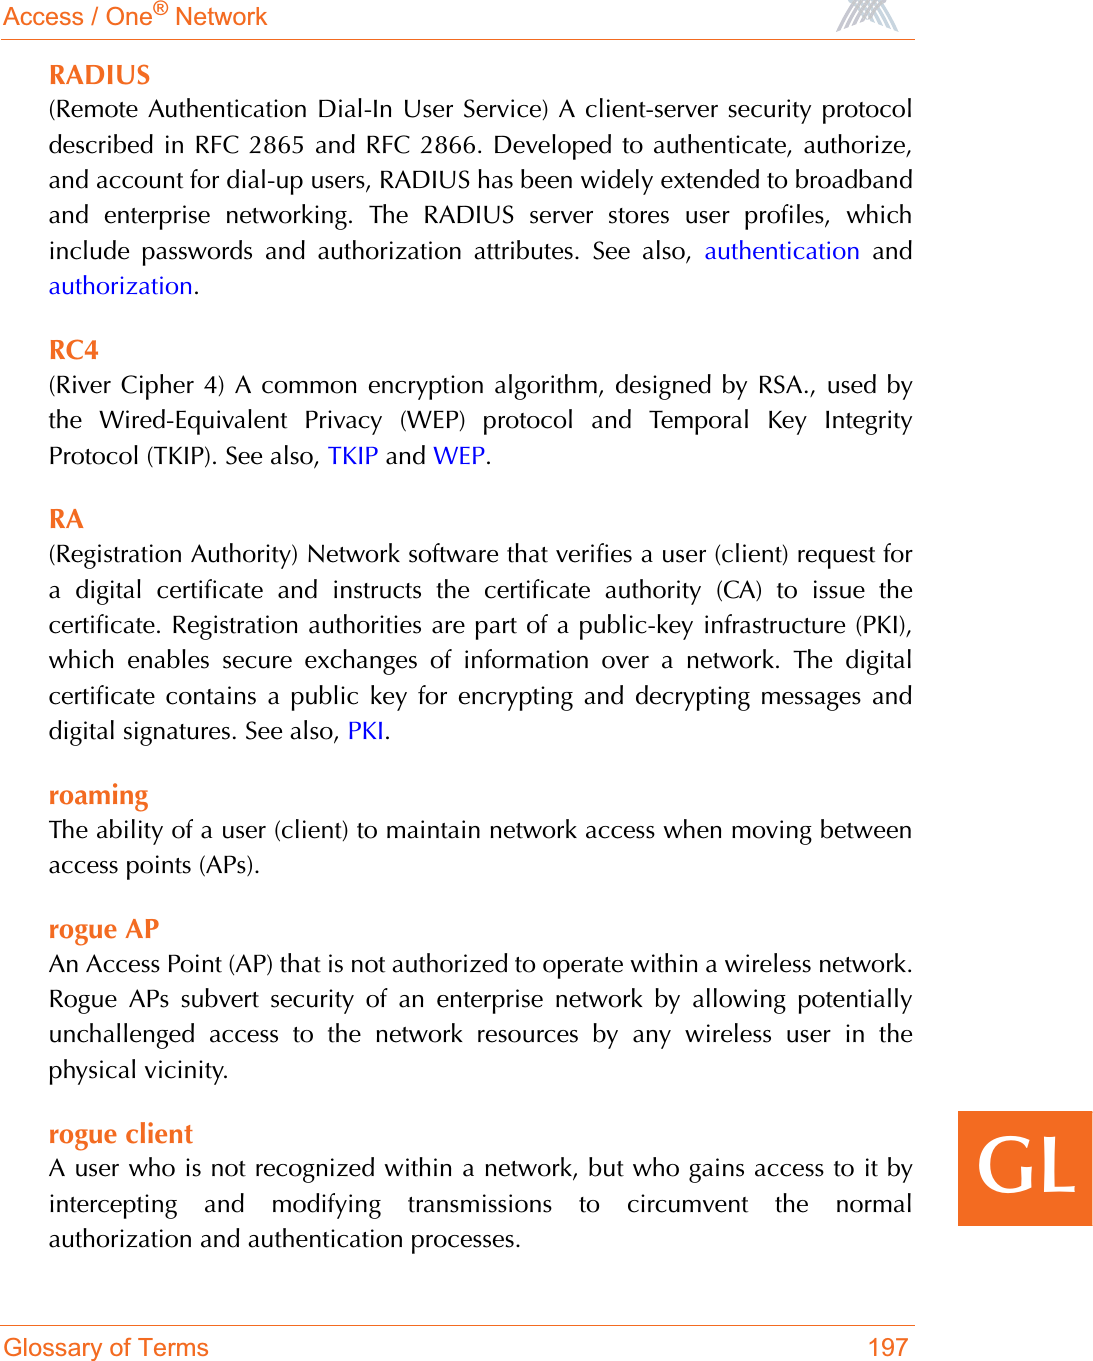 Access / One® NetworkGlossary of Terms 197GLRADIUS(Remote Authentication Dial-In User Service) A client-server security protocoldescribed in RFC 2865 and RFC 2866. Developed to authenticate, authorize,and account for dial-up users, RADIUS has been widely extended to broadbandand enterprise networking. The RADIUS server stores user profiles, whichinclude passwords and authorization attributes. See also, authentication andauthorization.RC4(River Cipher 4) A common encryption algorithm, designed by RSA., used bythe Wired-Equivalent Privacy (WEP) protocol and Temporal Key IntegrityProtocol (TKIP). See also, TKIP and WEP.RA(Registration Authority) Network software that verifies a user (client) request fora digital certificate and instructs the certificate authority (CA) to issue thecertificate. Registration authorities are part of a public-key infrastructure (PKI),which enables secure exchanges of information over a network. The digitalcertificate contains a public key for encrypting and decrypting messages anddigital signatures. See also, PKI.roamingThe ability of a user (client) to maintain network access when moving betweenaccess points (APs).rogue APAn Access Point (AP) that is not authorized to operate within a wireless network.Rogue APs subvert security of an enterprise network by allowing potentiallyunchallenged access to the network resources by any wireless user in thephysical vicinity.rogue clientA user who is not recognized within a network, but who gains access to it byintercepting and modifying transmissions to circumvent the normalauthorization and authentication processes.